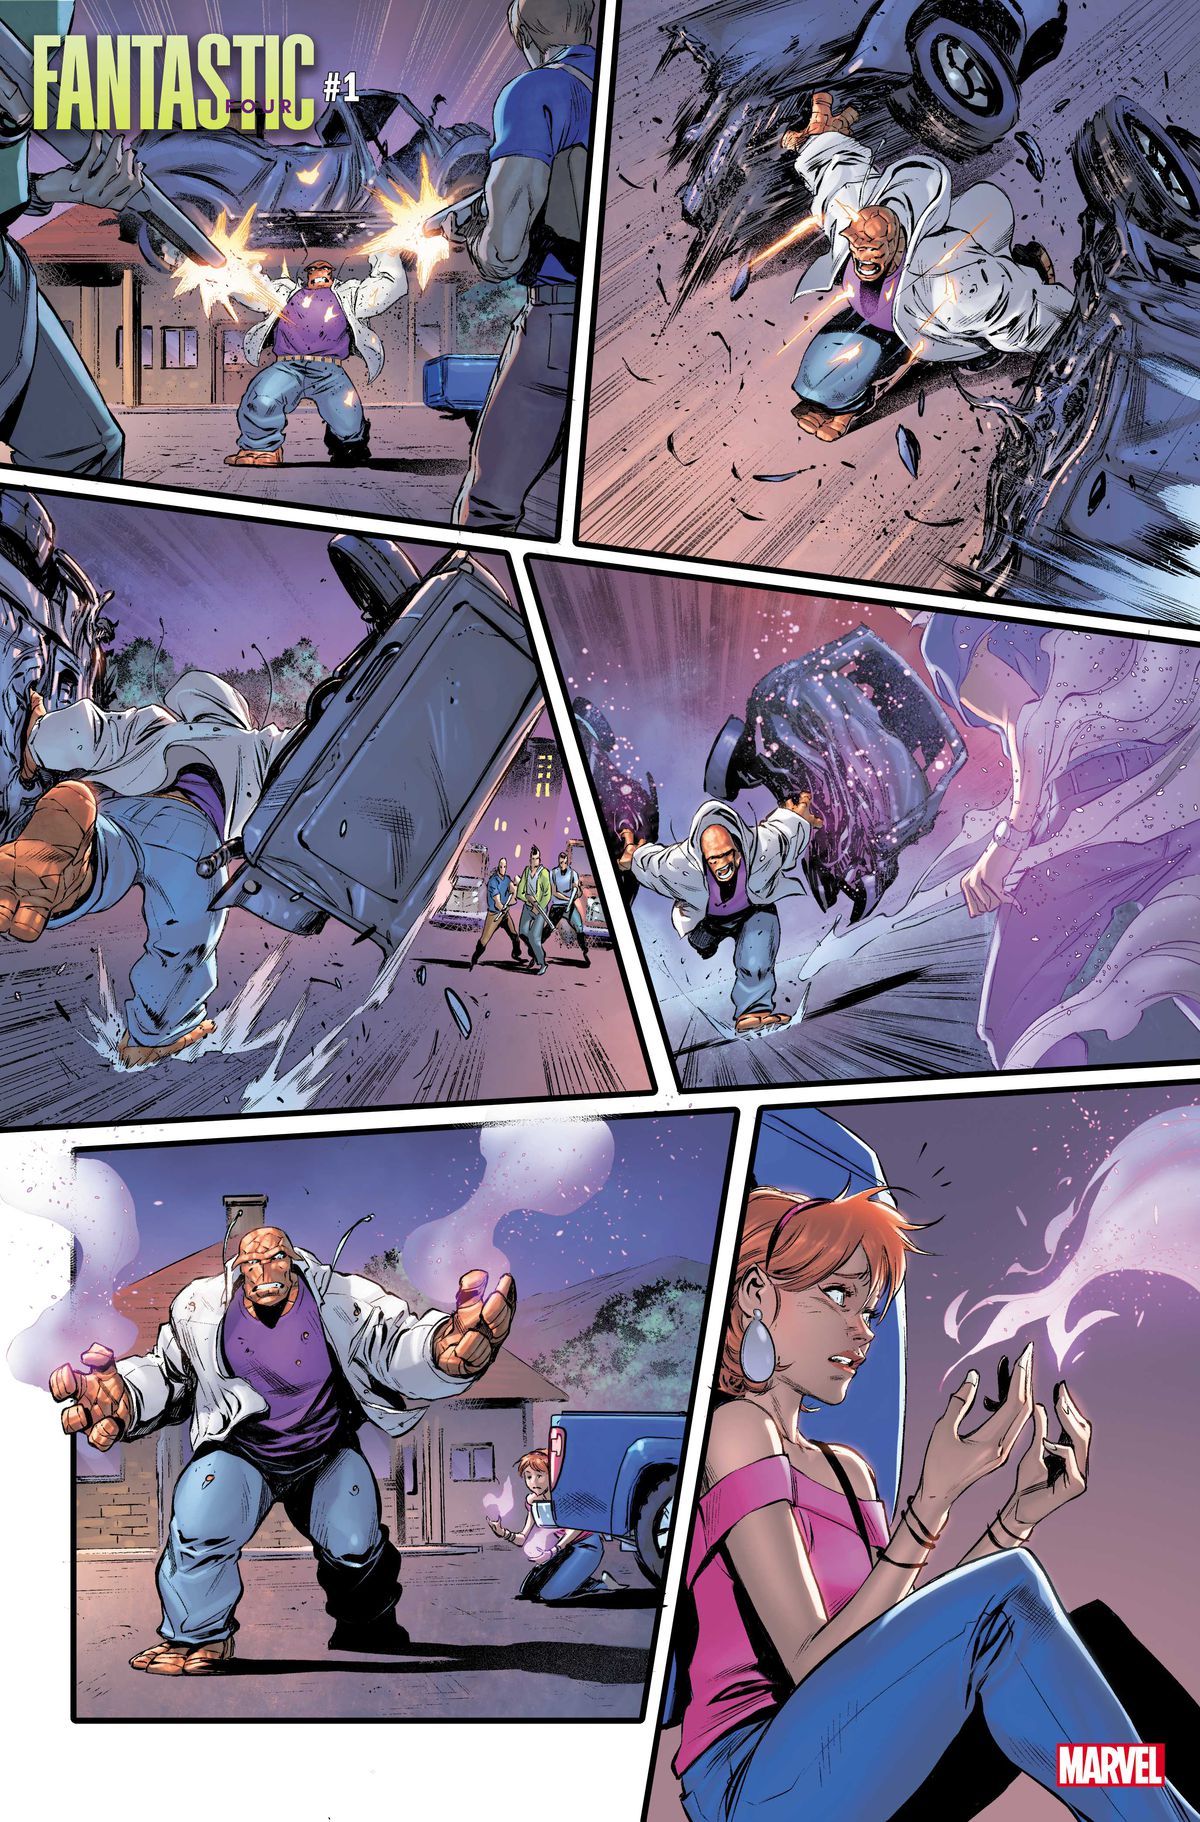 Ben Grimm trashes several old timey trucks, as purple vapor starts to pour off of him and Alicia in Fantastic Four #1 (2022). 